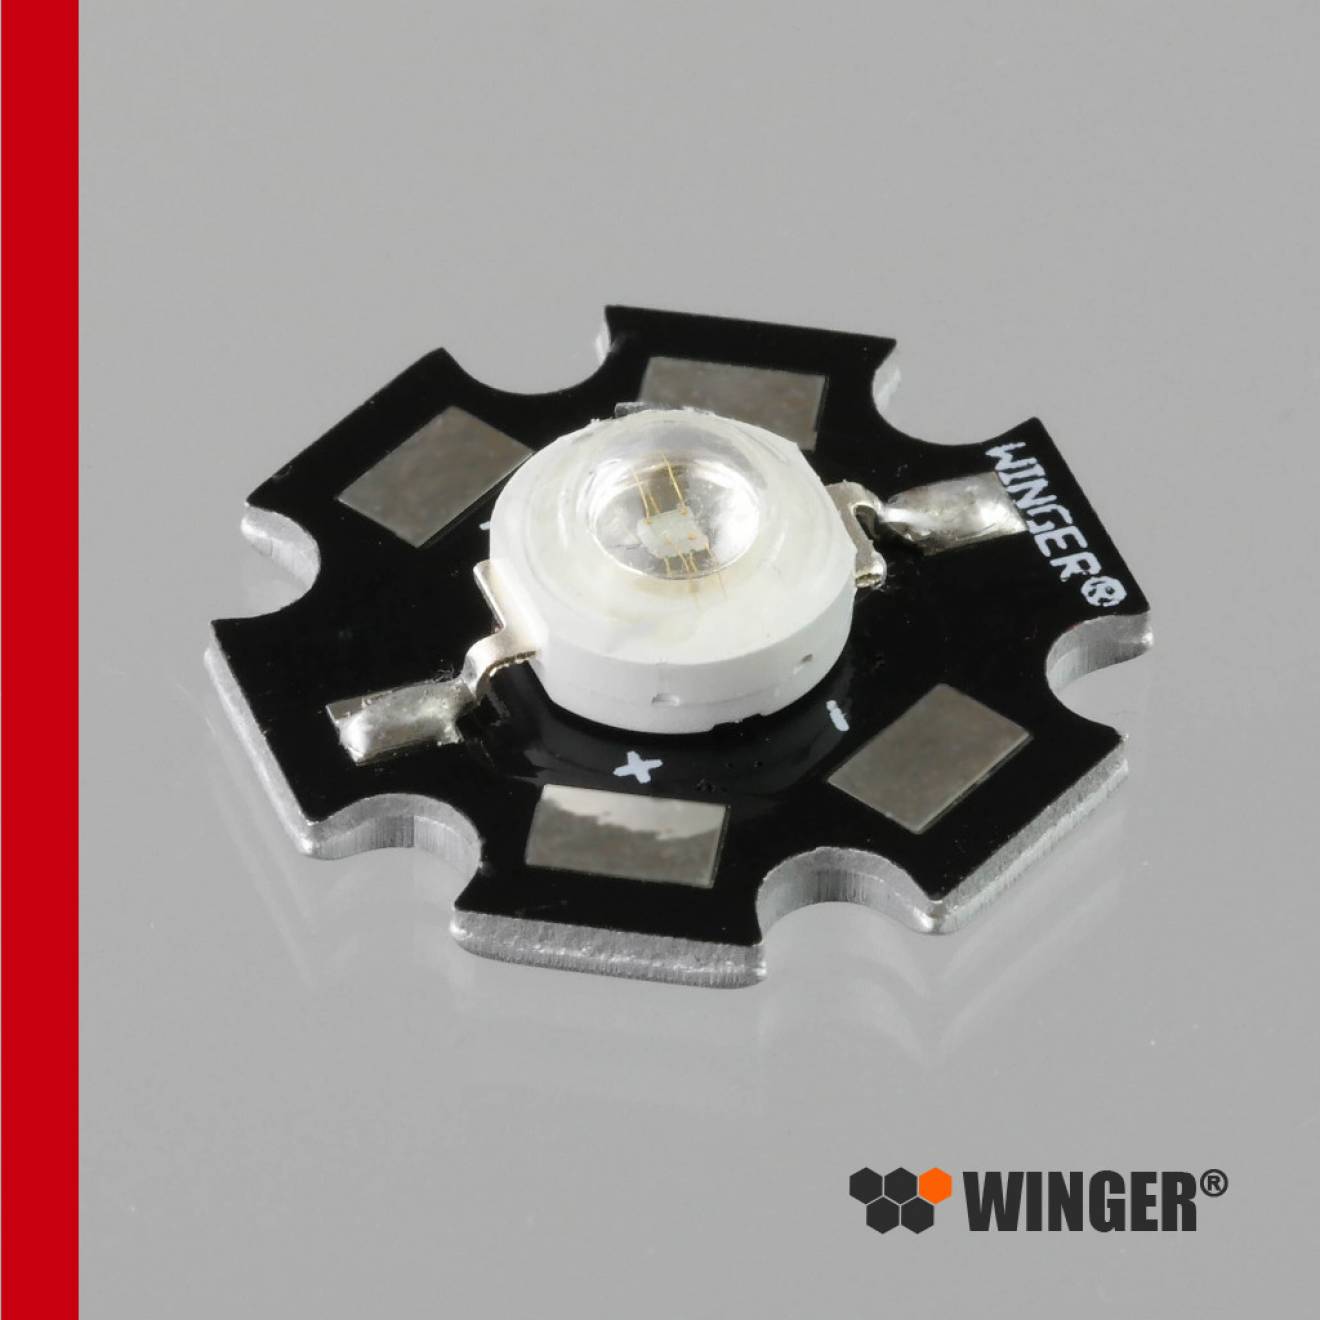 WINGER® WEPDR3-S1 Power LED Star tiefrot (650nm) 3W - 45lm